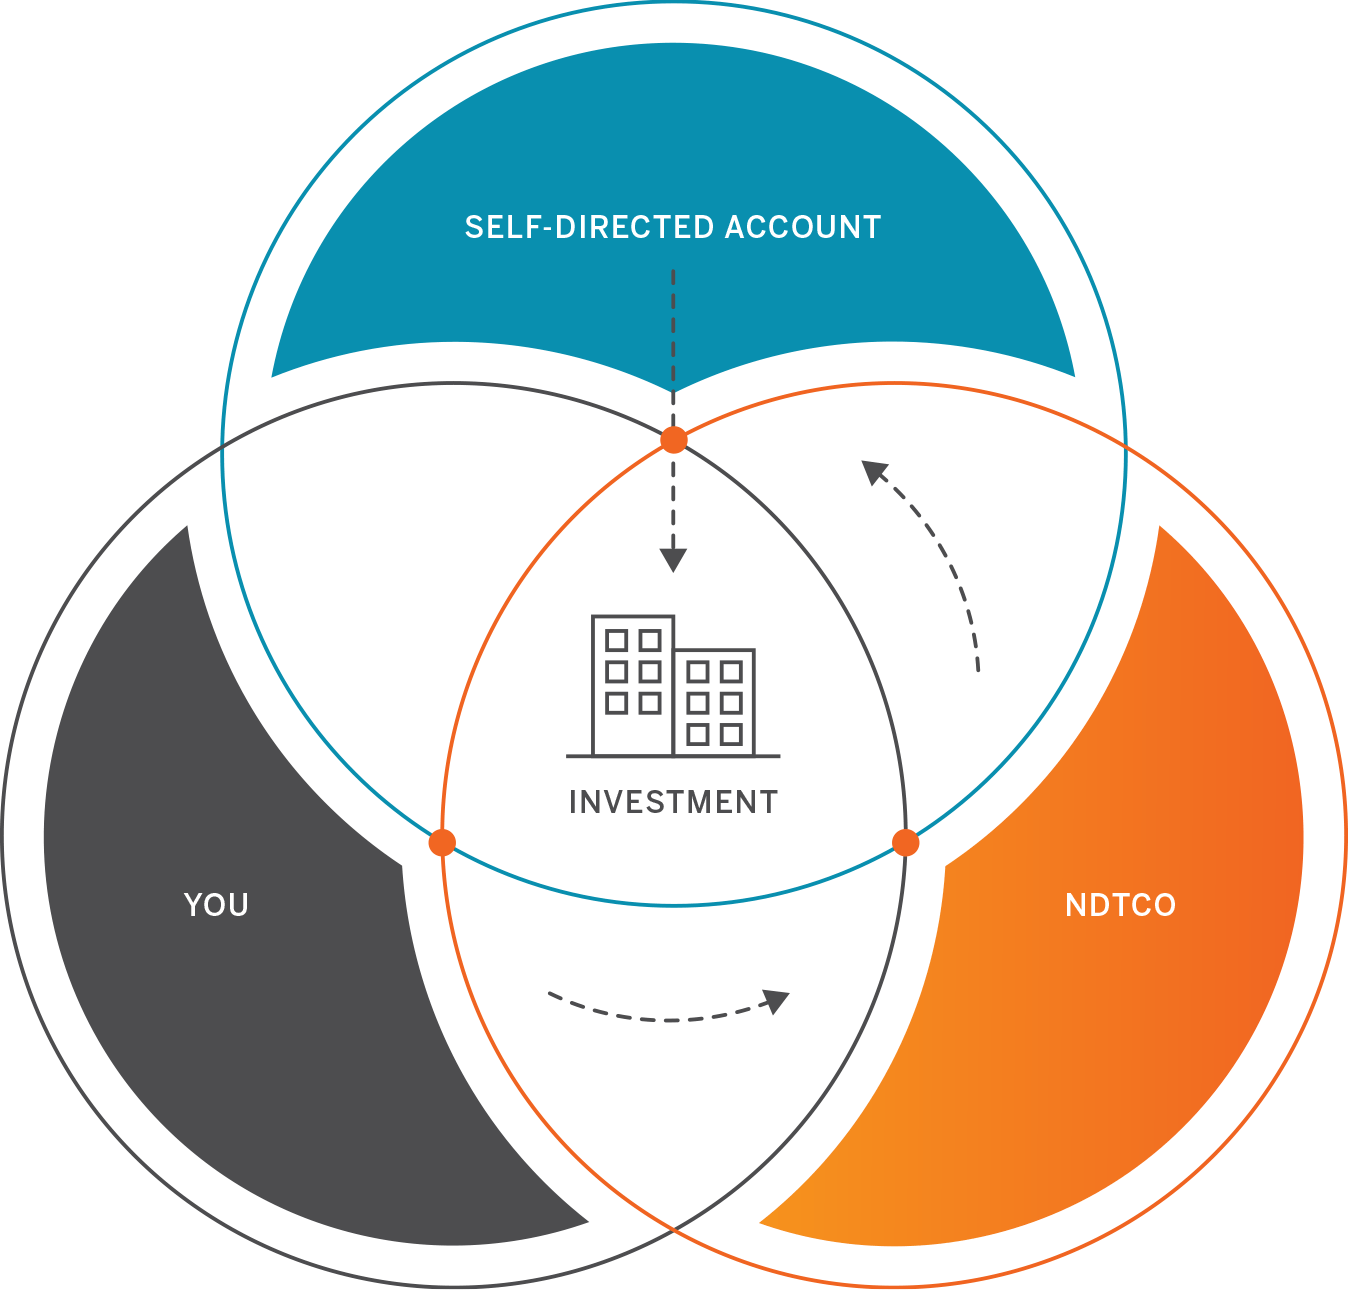 Circle graphic detailing the process of using NDTCO as a custodial service for your self-directed account and alternative investments